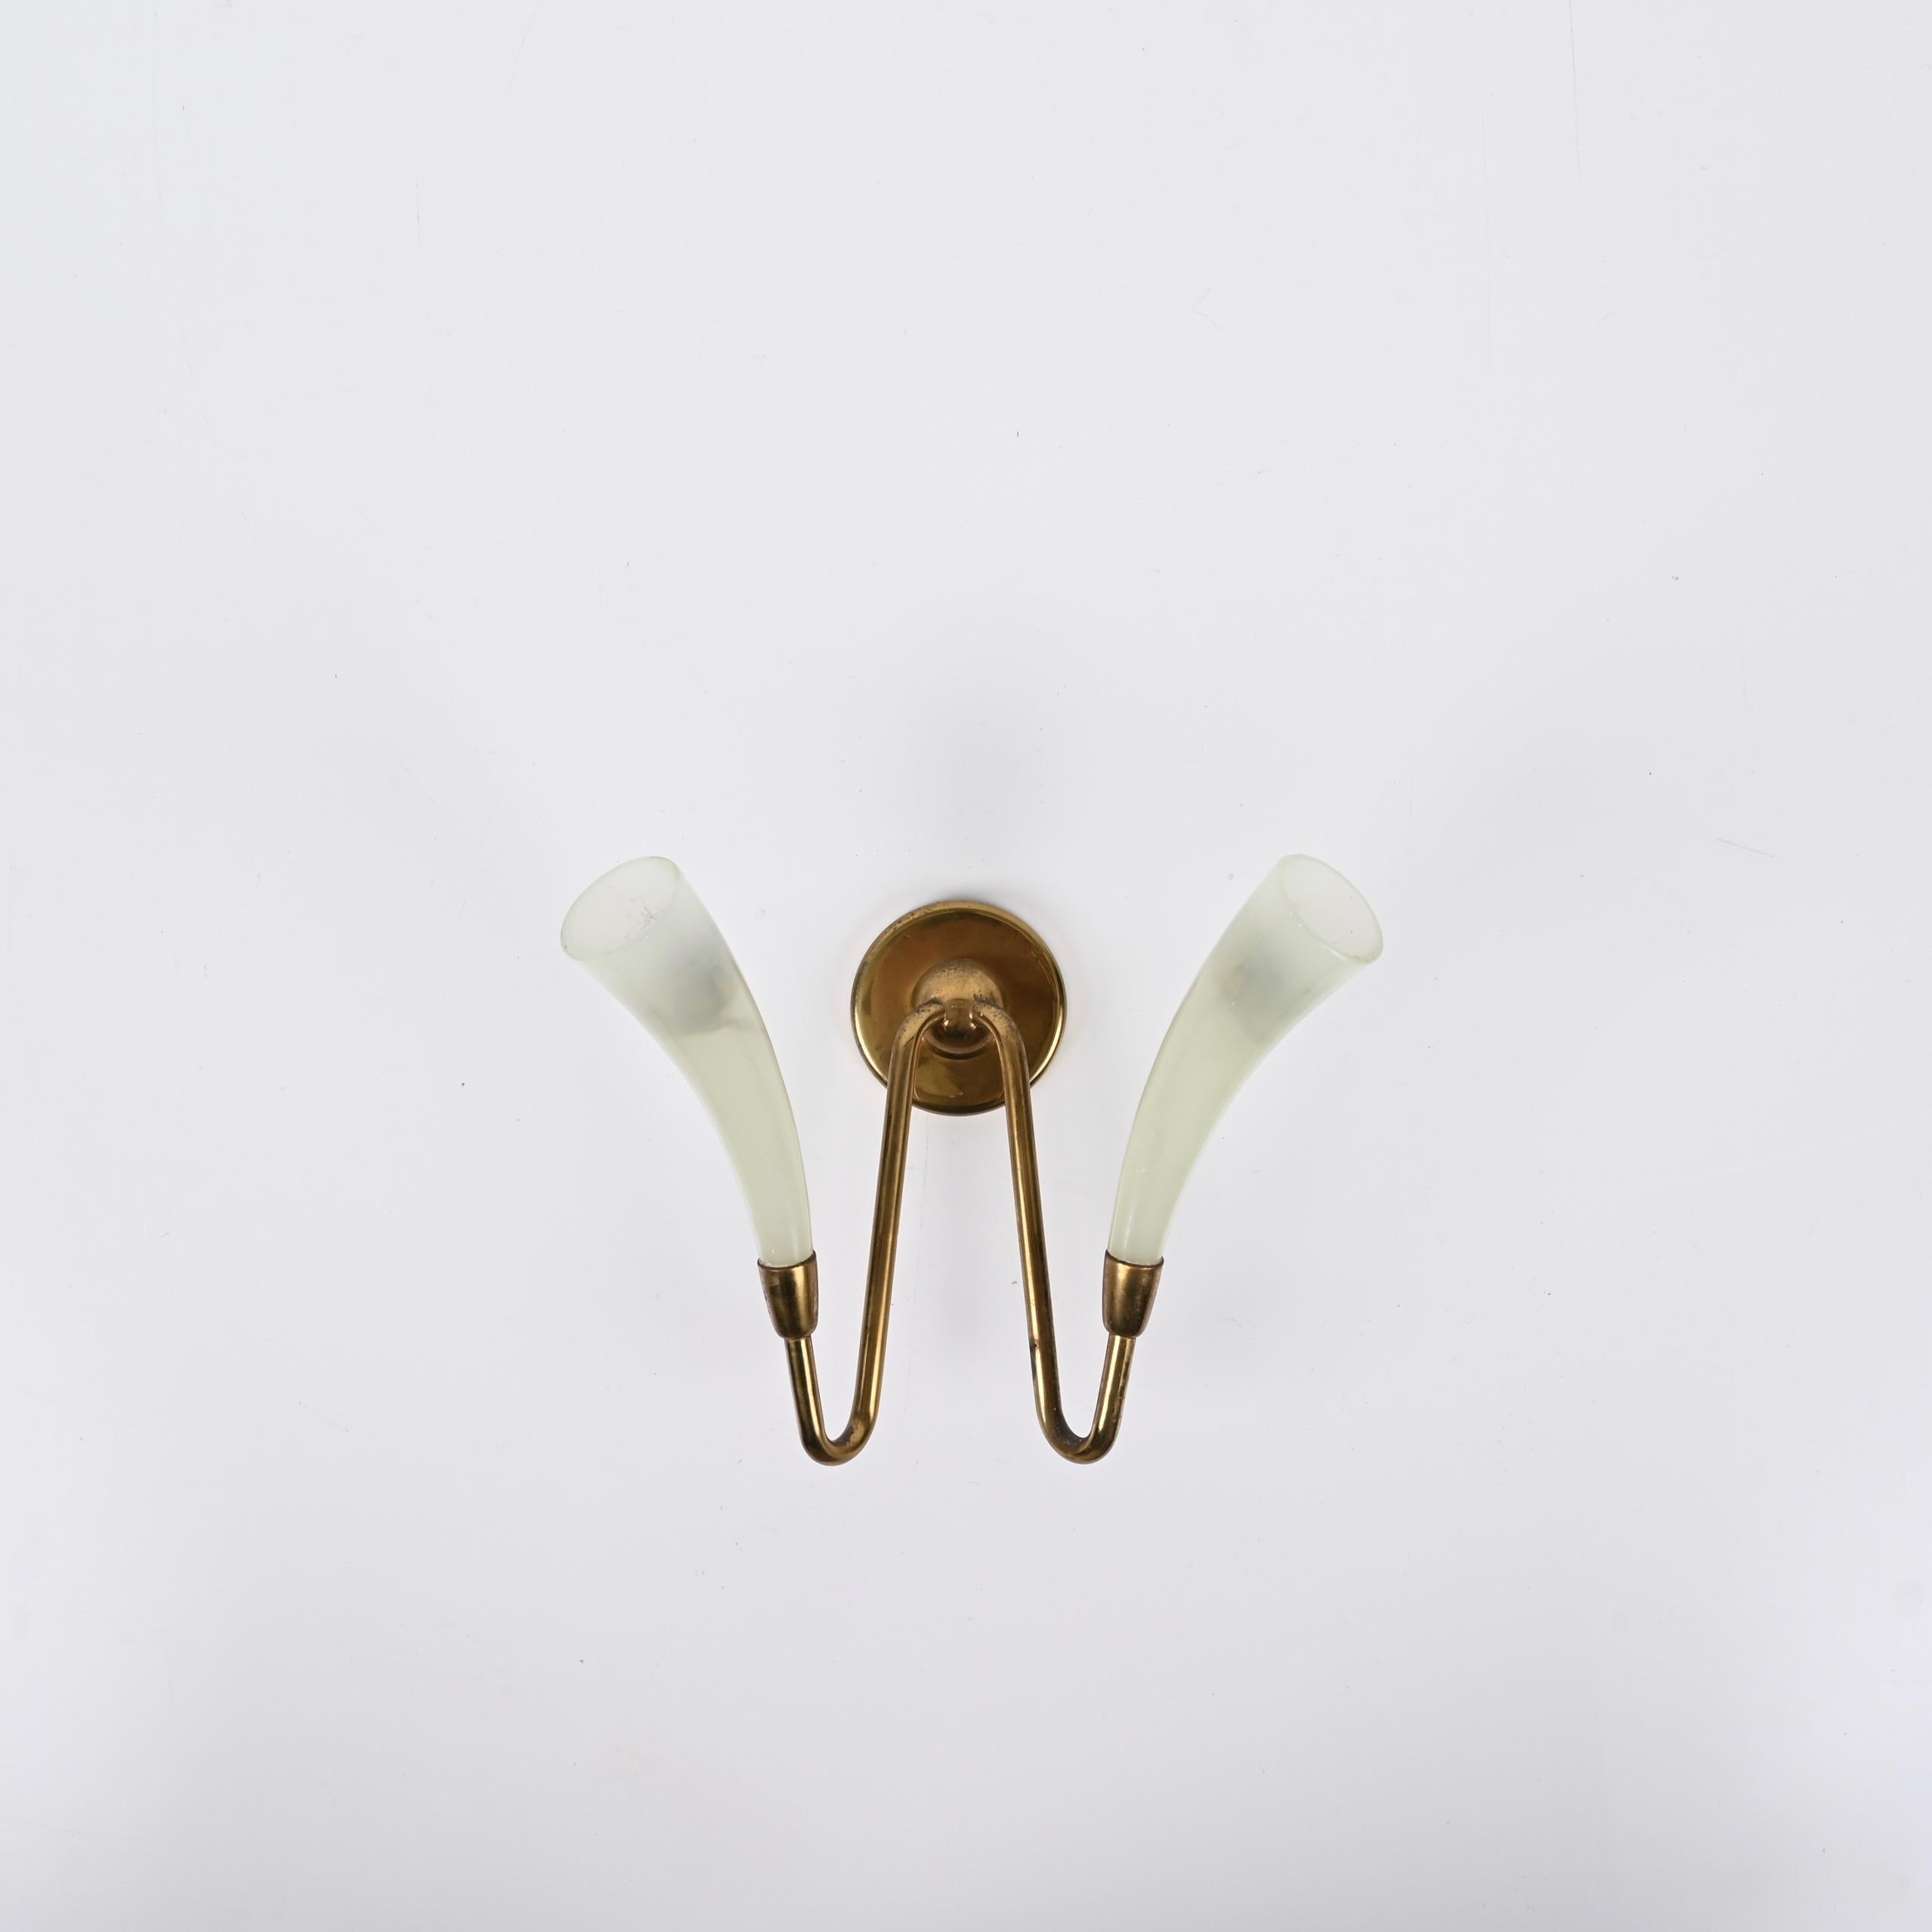 Pair of Italian Sconces in Green Murano Glass and Brass, Guglielmo UIrich 1940s For Sale 10